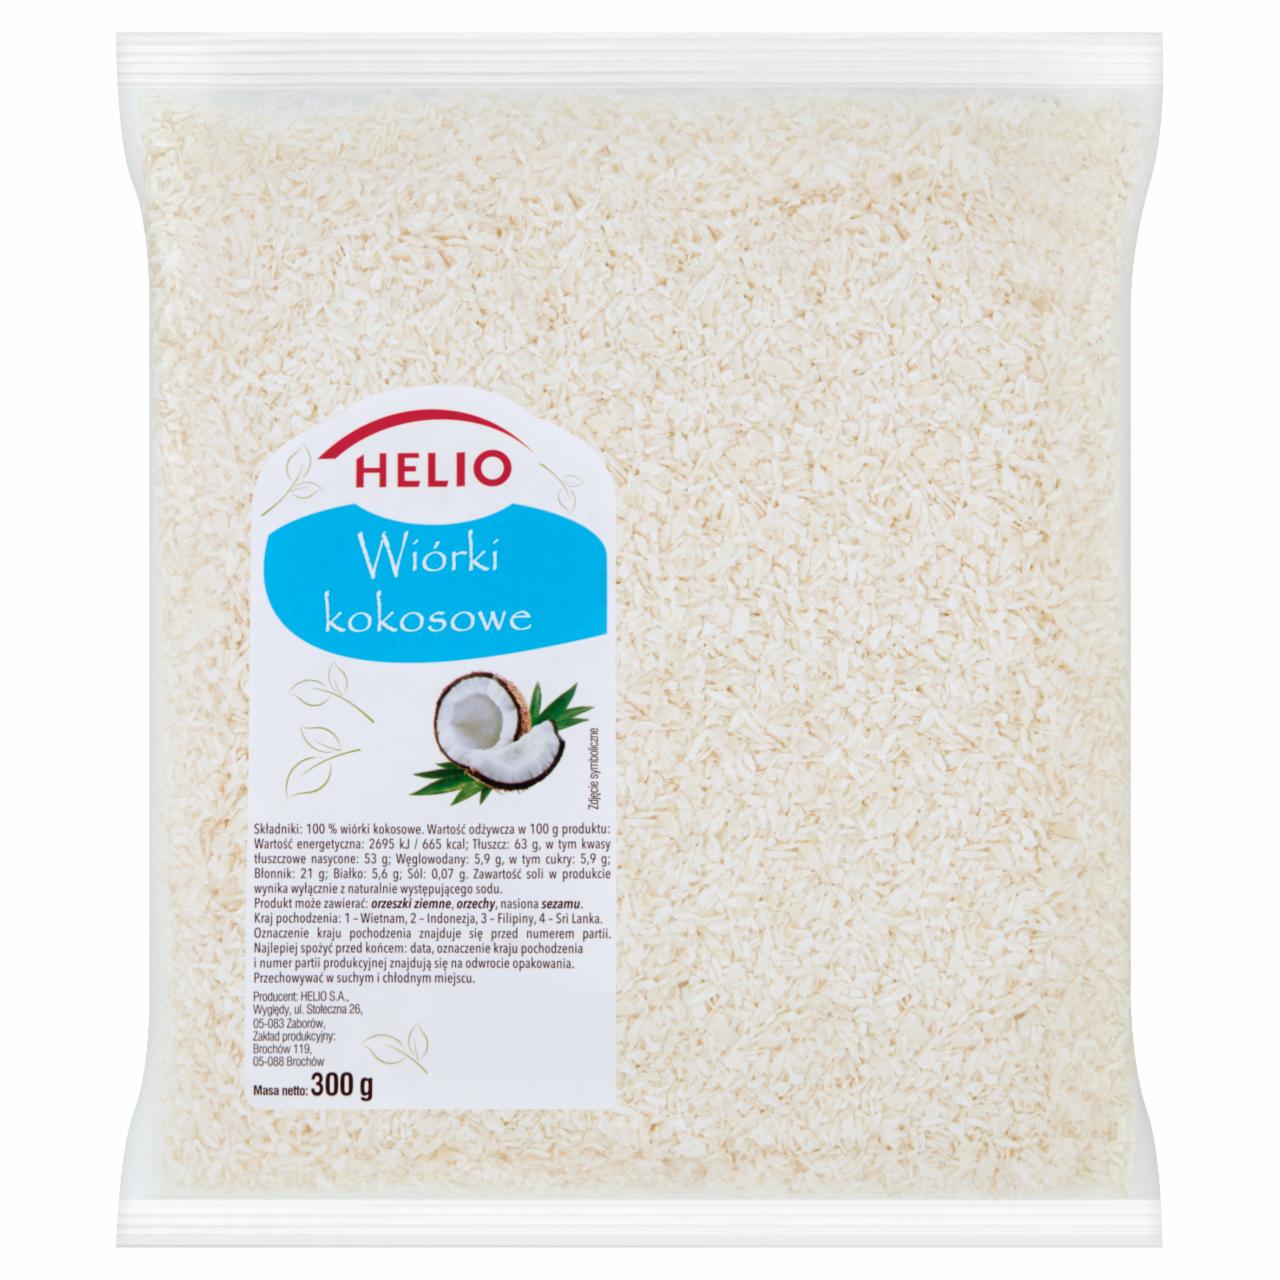 Photo - Helio Desiccated Coconuts 300 g